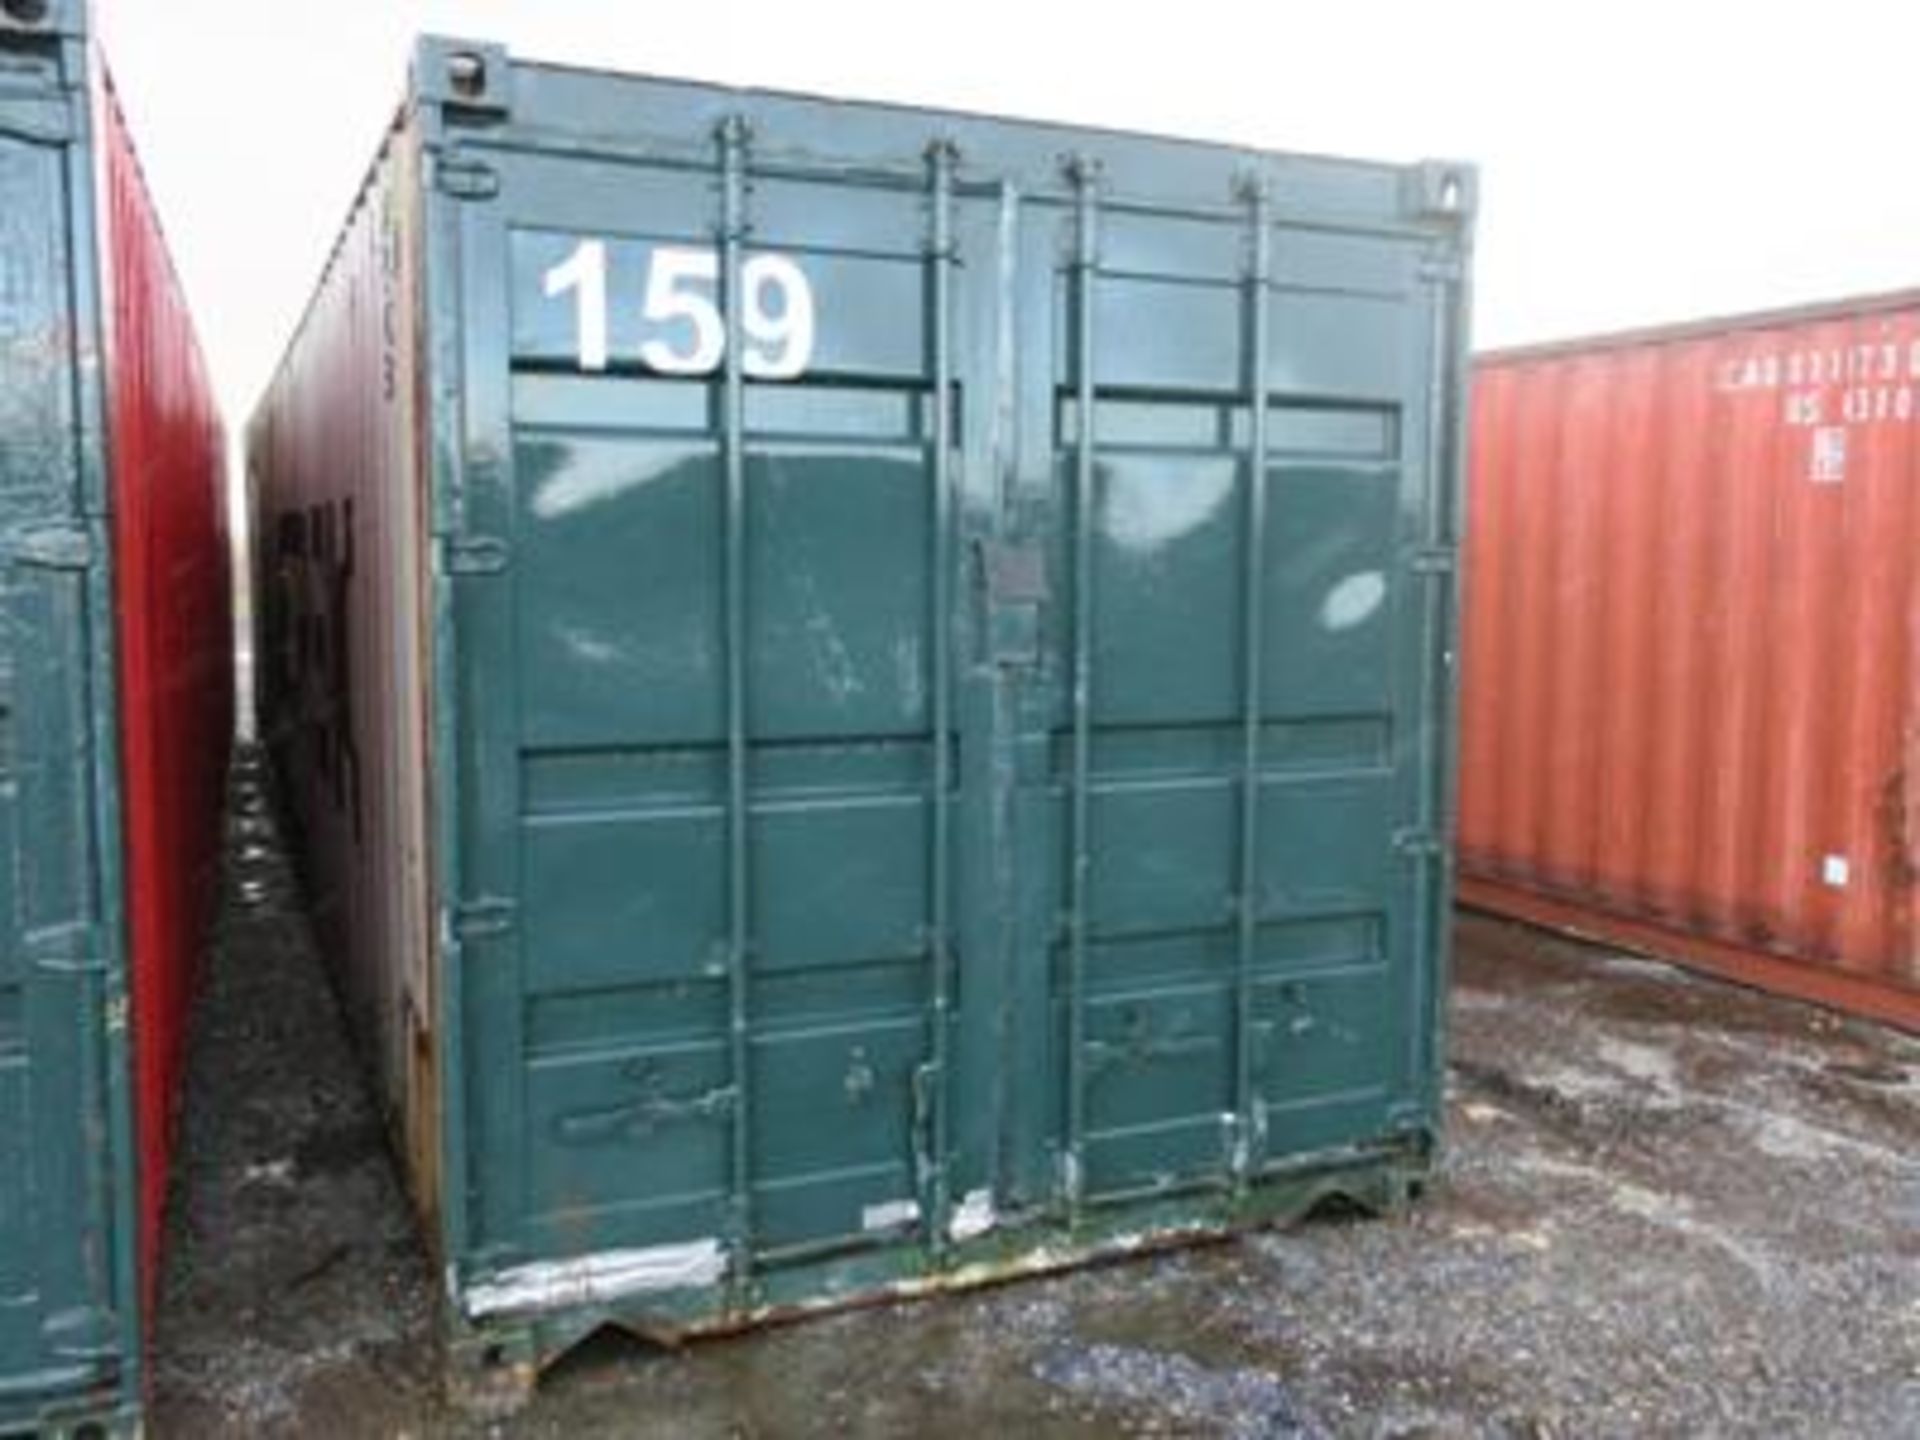 * 40ft Shipping Container with insulated roof (Container ID 159). Sold loaded onto buyer's